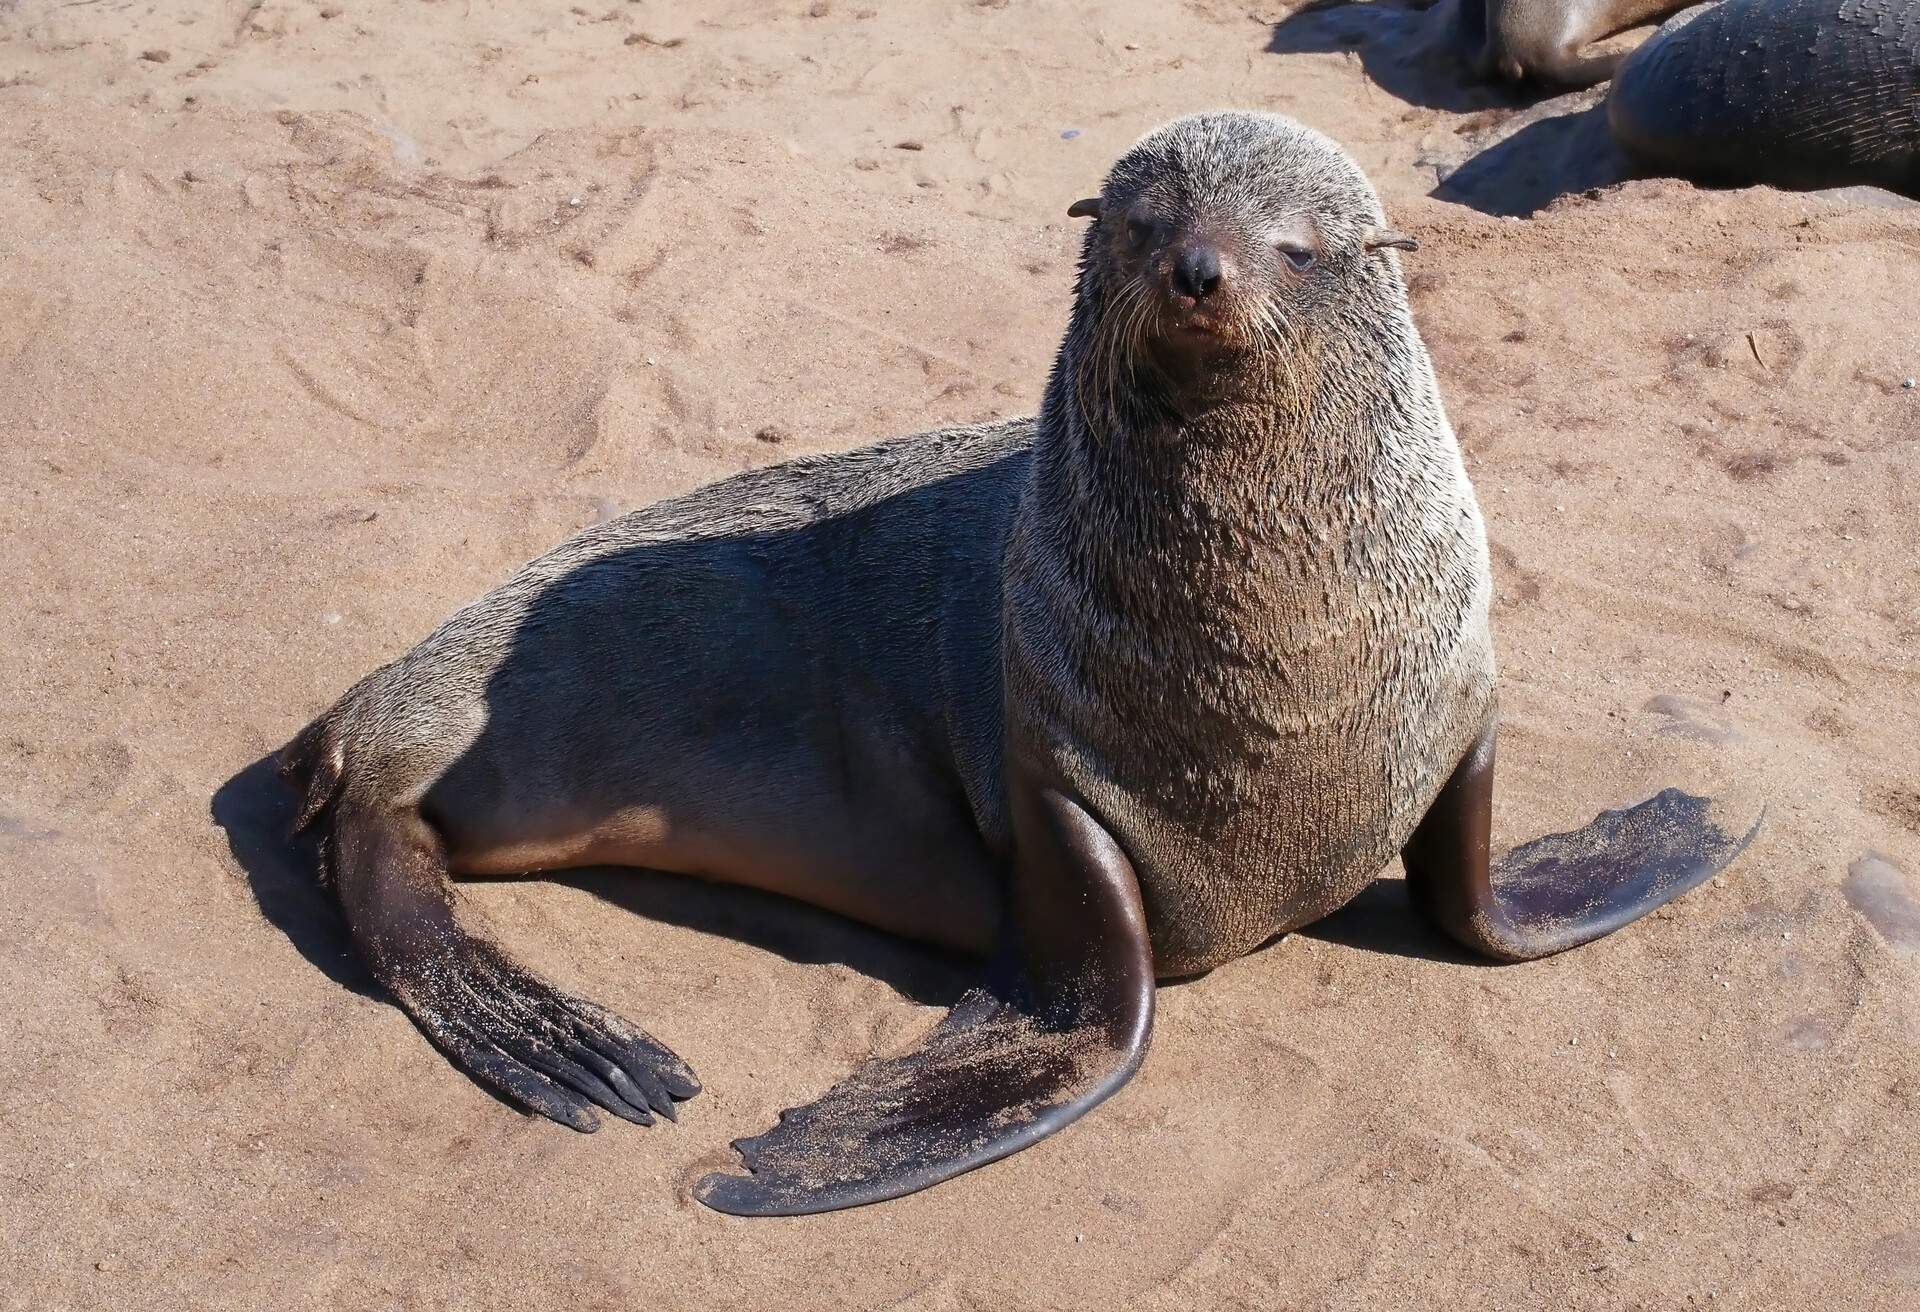 Close-up picture of a seal at Cape Cross Reserve, Namibia